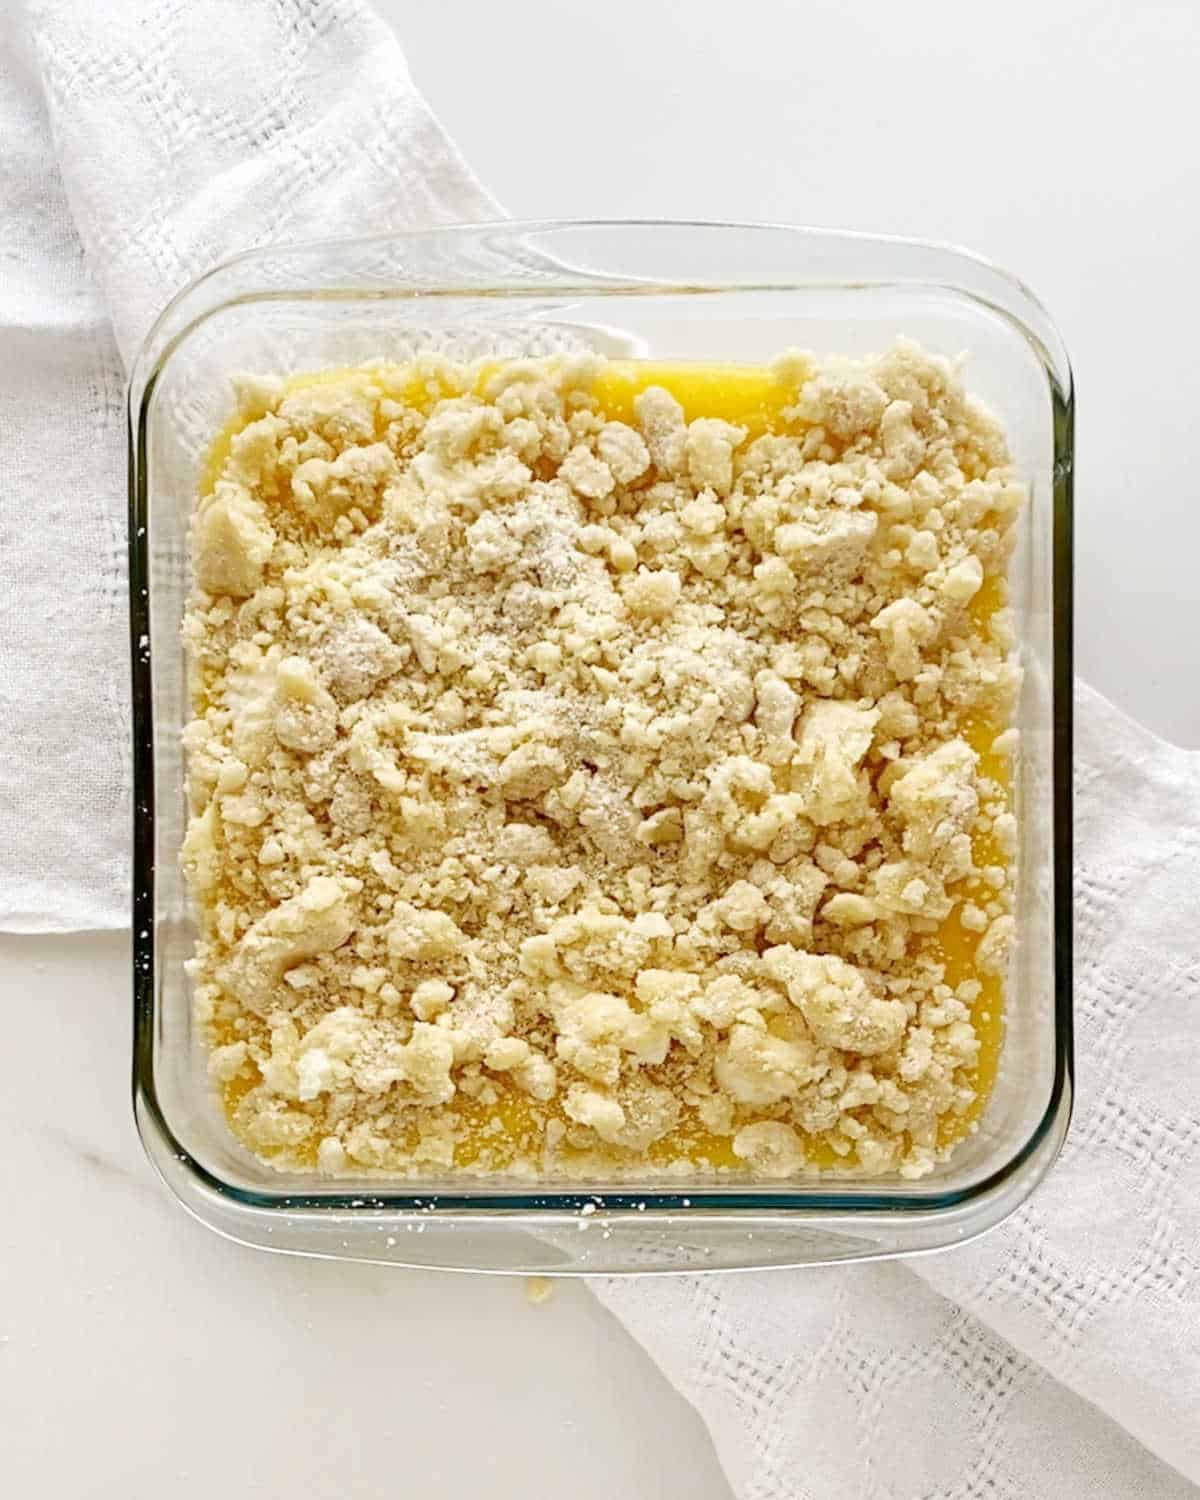 Crumble topped lemon dump cake before baking in a glass square baking dish. White cloth and white marble surface.